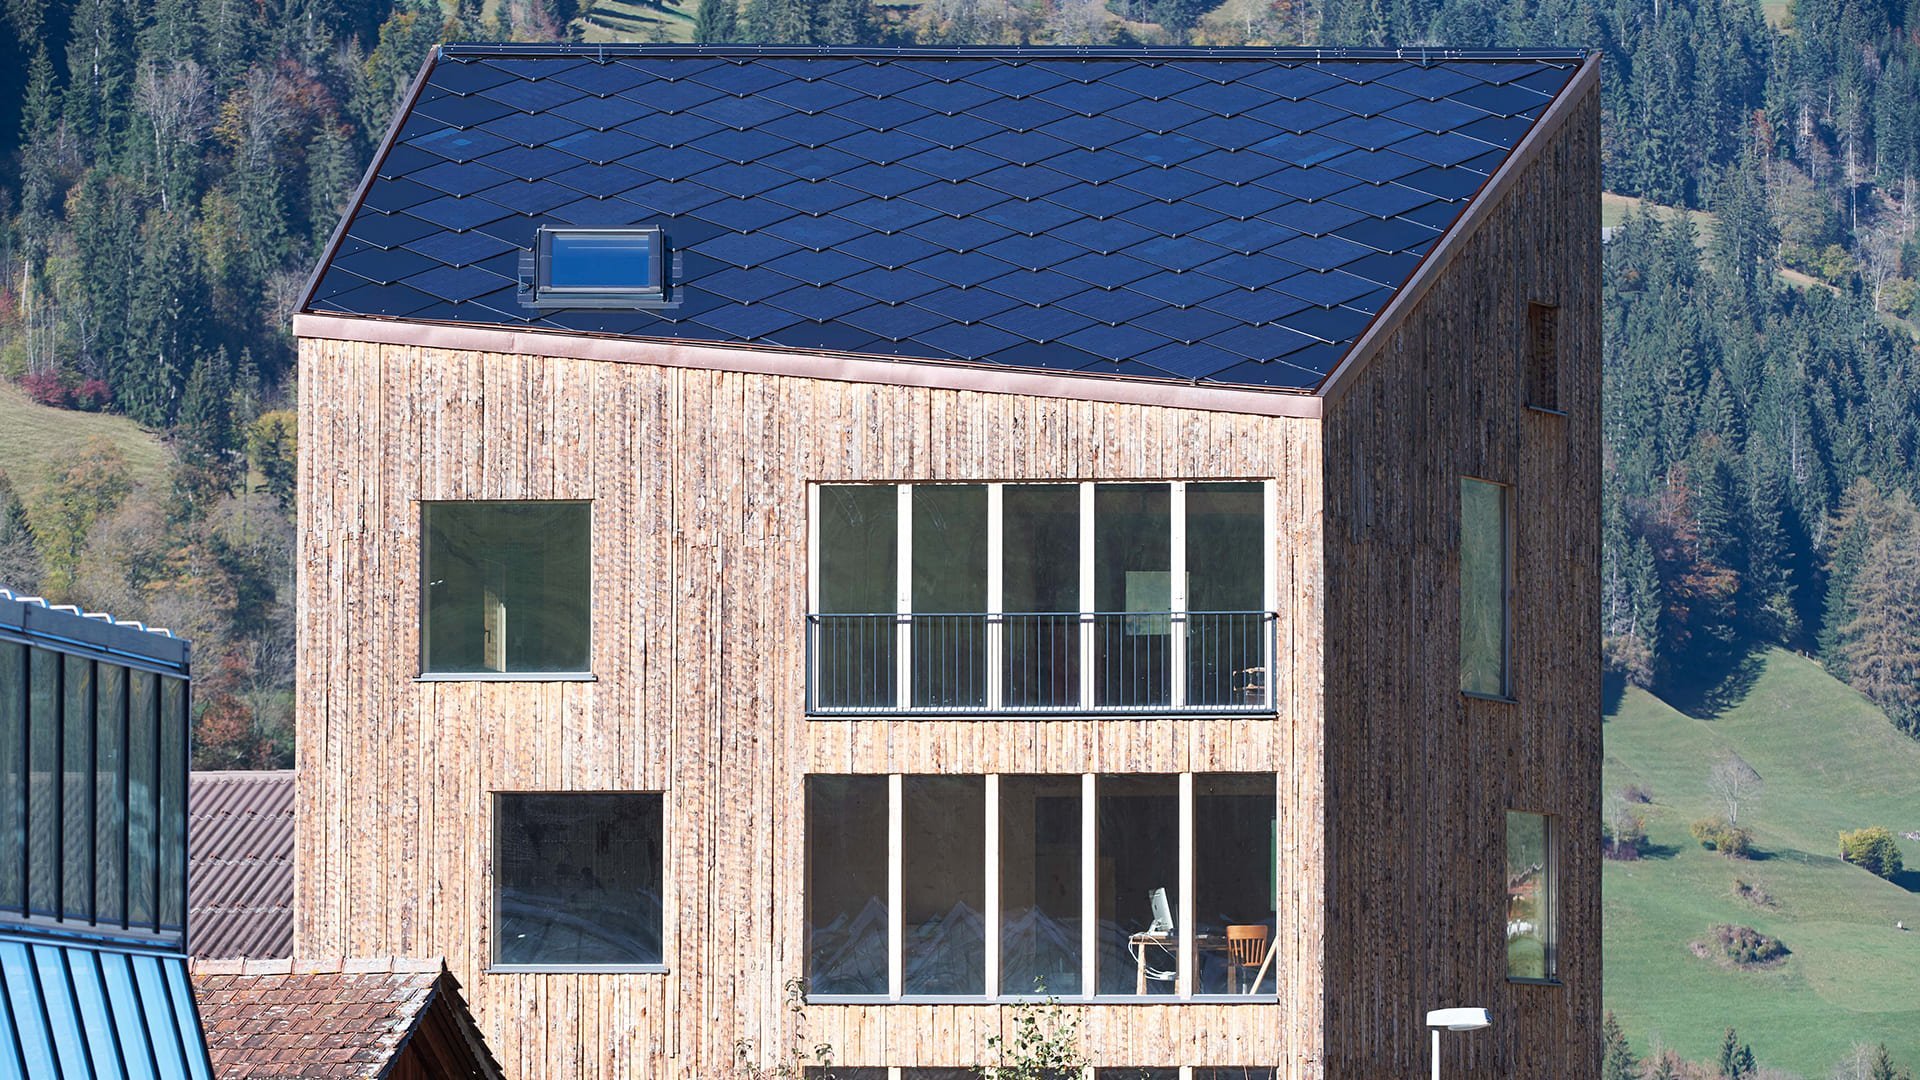 SunStyle solar tiles used on this cradle-to-cradle mixed use residential and commercial building with a solar roof